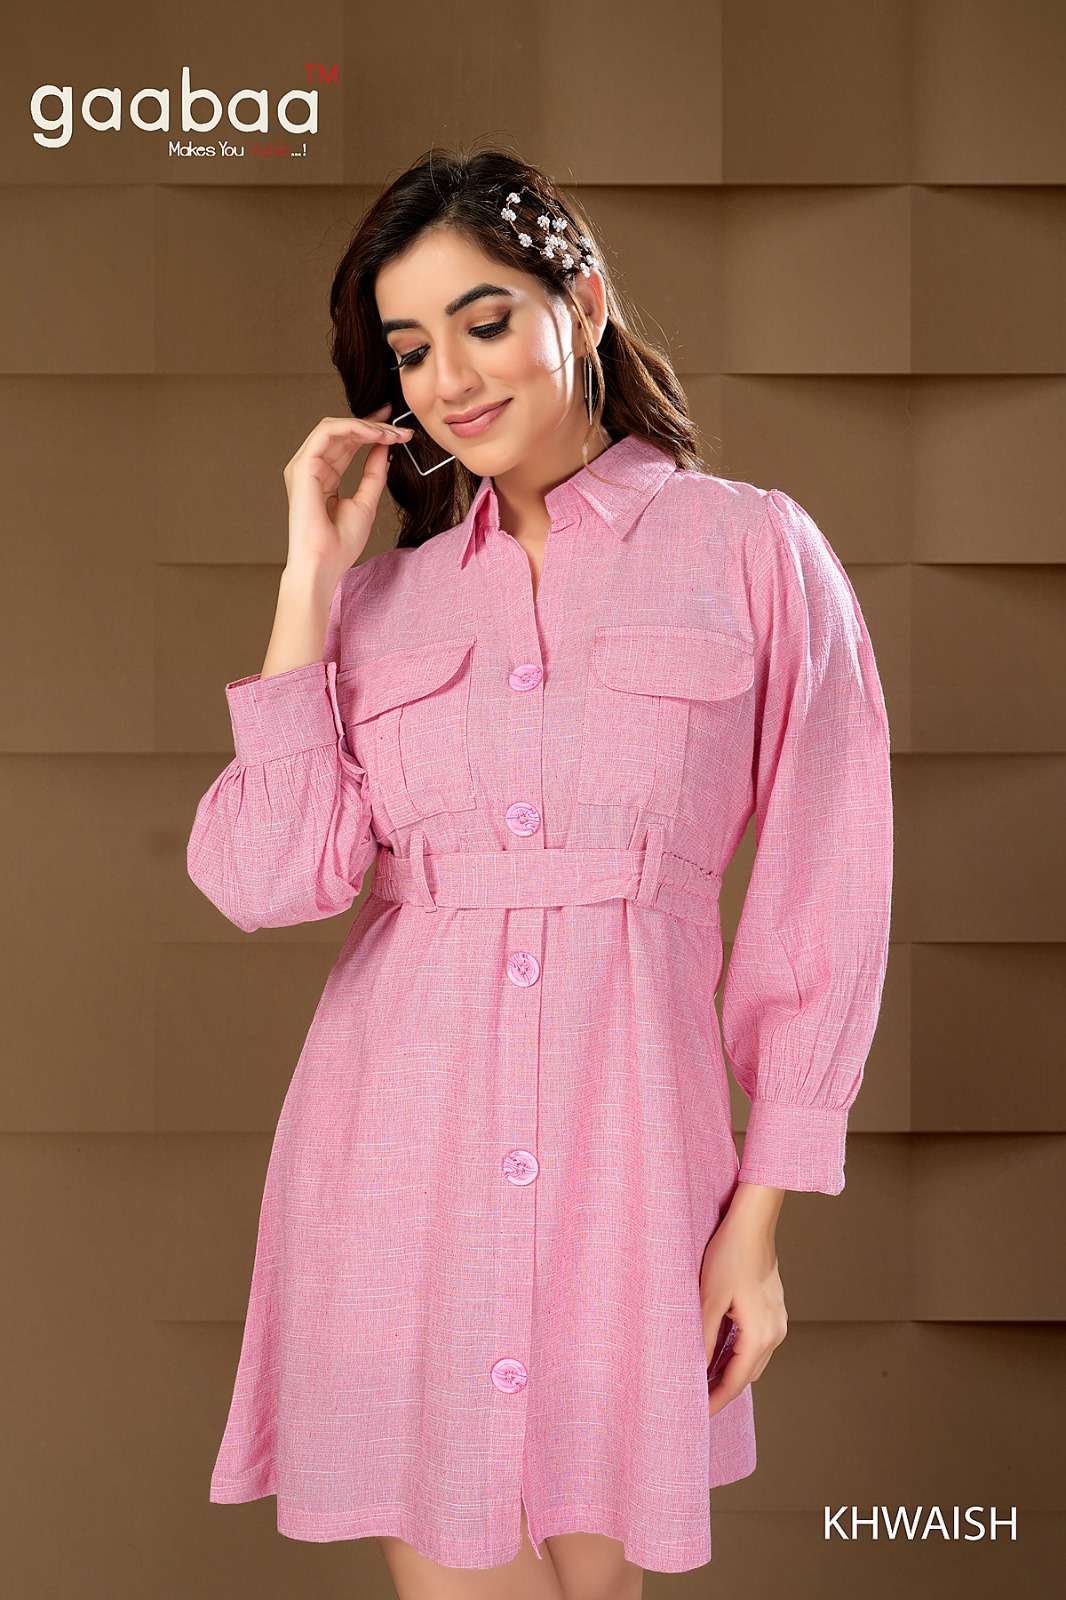 Gaabaa Khwaish Online Store Sales Office Wear Tunic Tops Collection